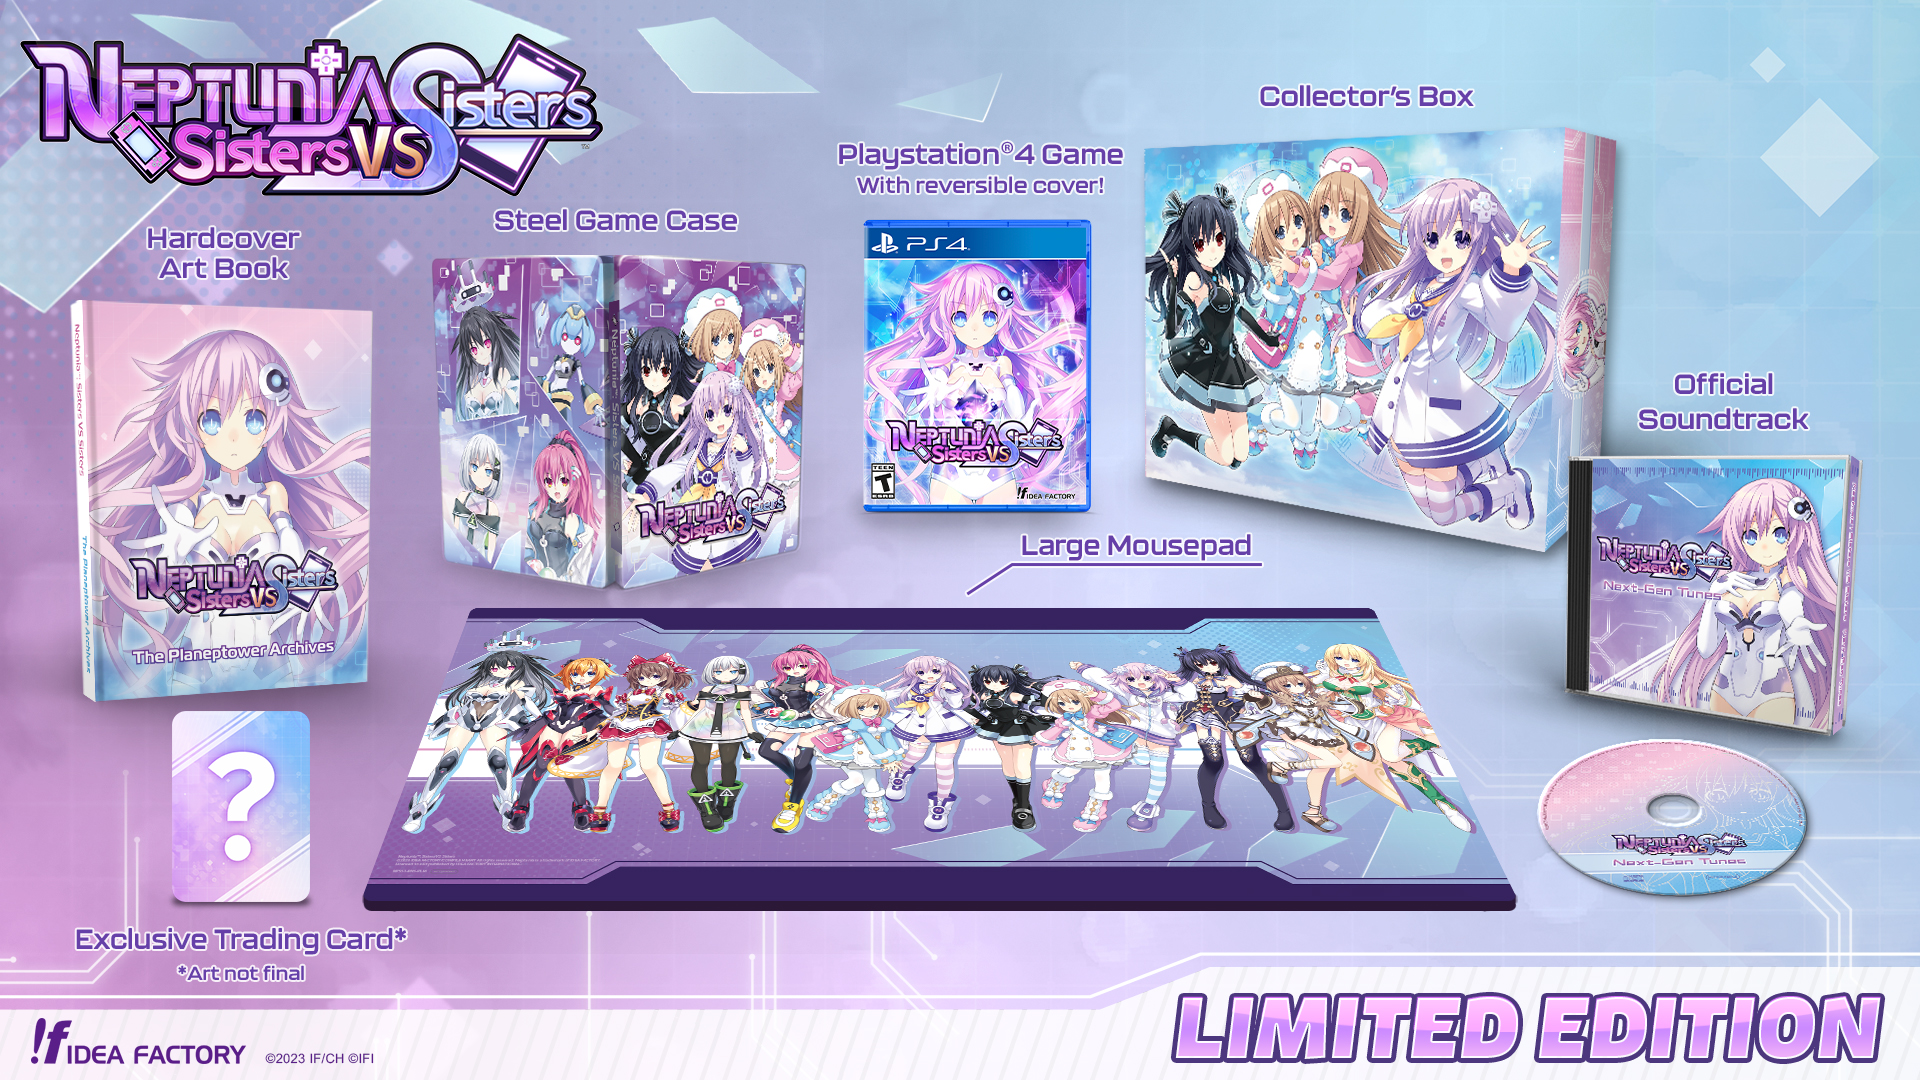 A shot of everything included with the Limited Edition of Neptunia: Sisters VS Sisters, including art book, steel game case, game, collector's box, soundtrack, trading card, and large mousepad.